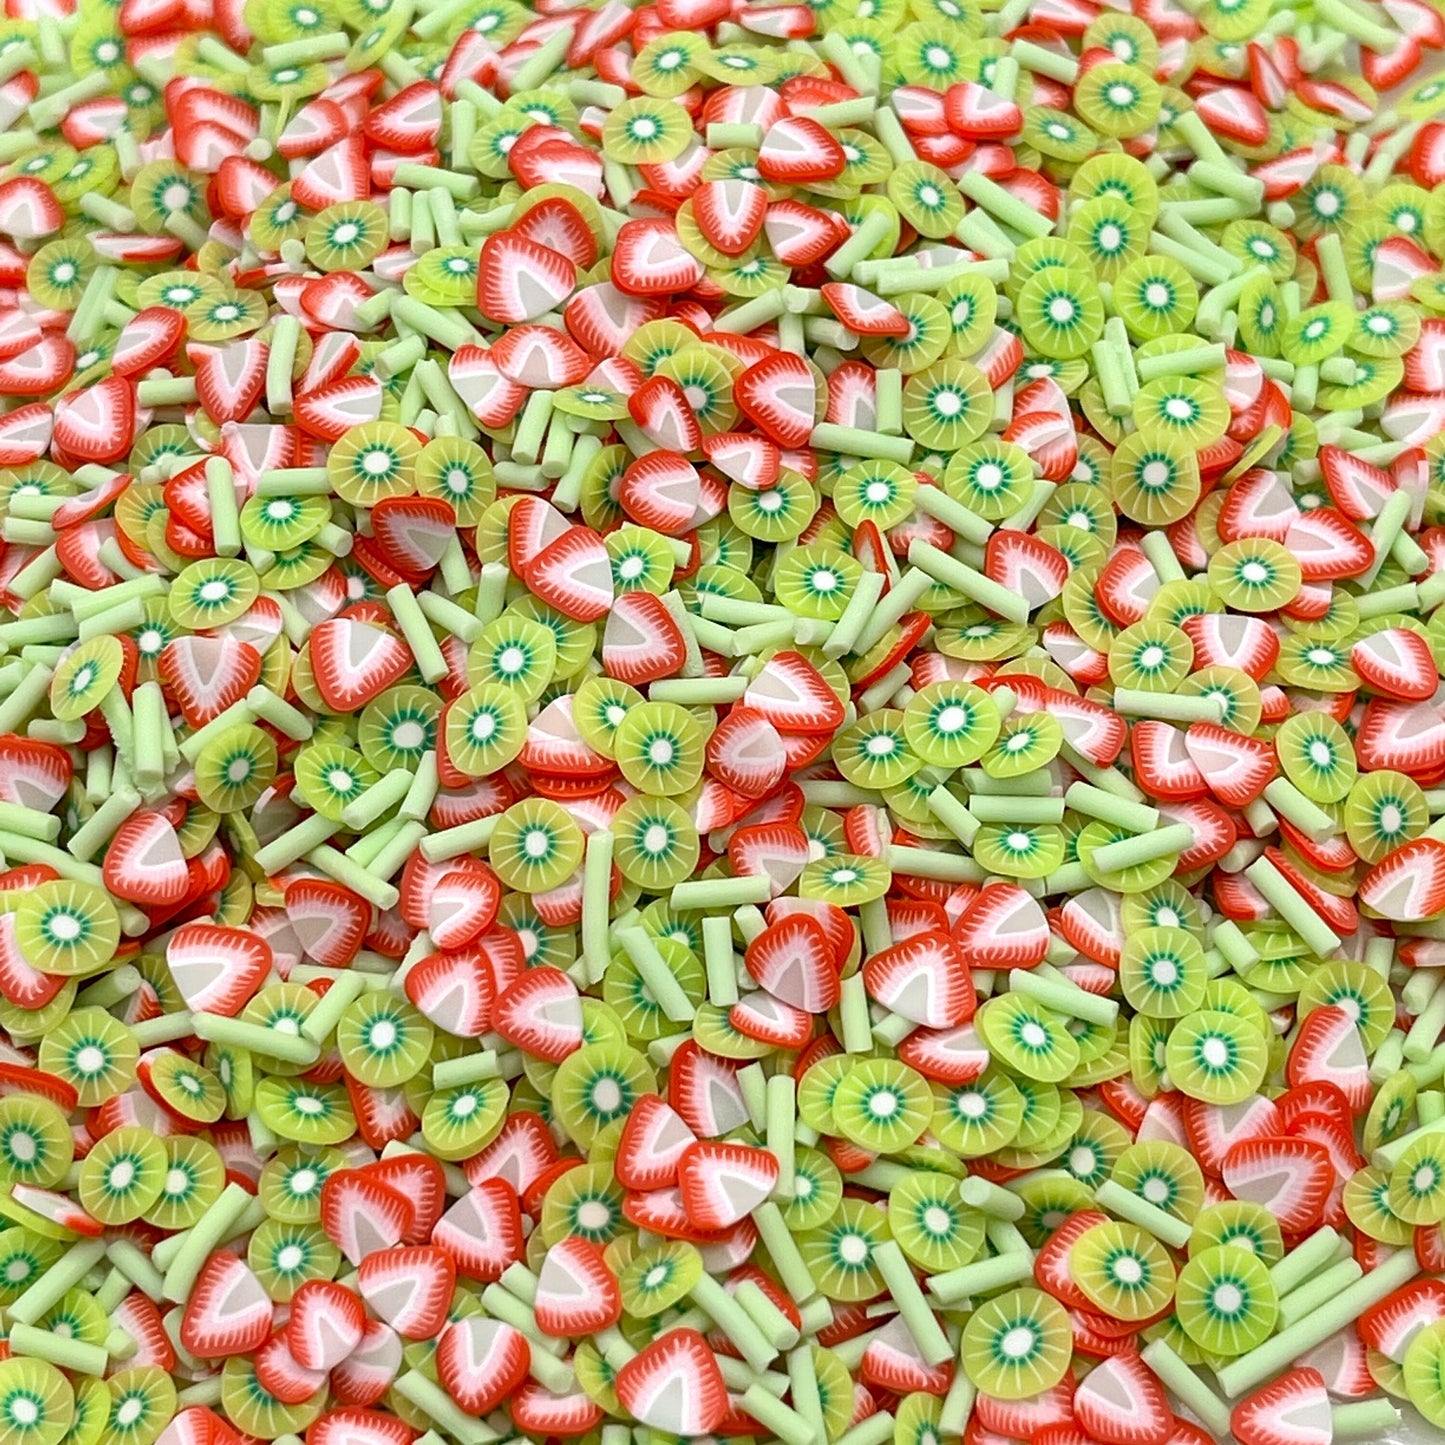 FAKE Strawberry Kiwi Polymer Clay Sprinkle Mix (NOT EDIBLE) D10-11